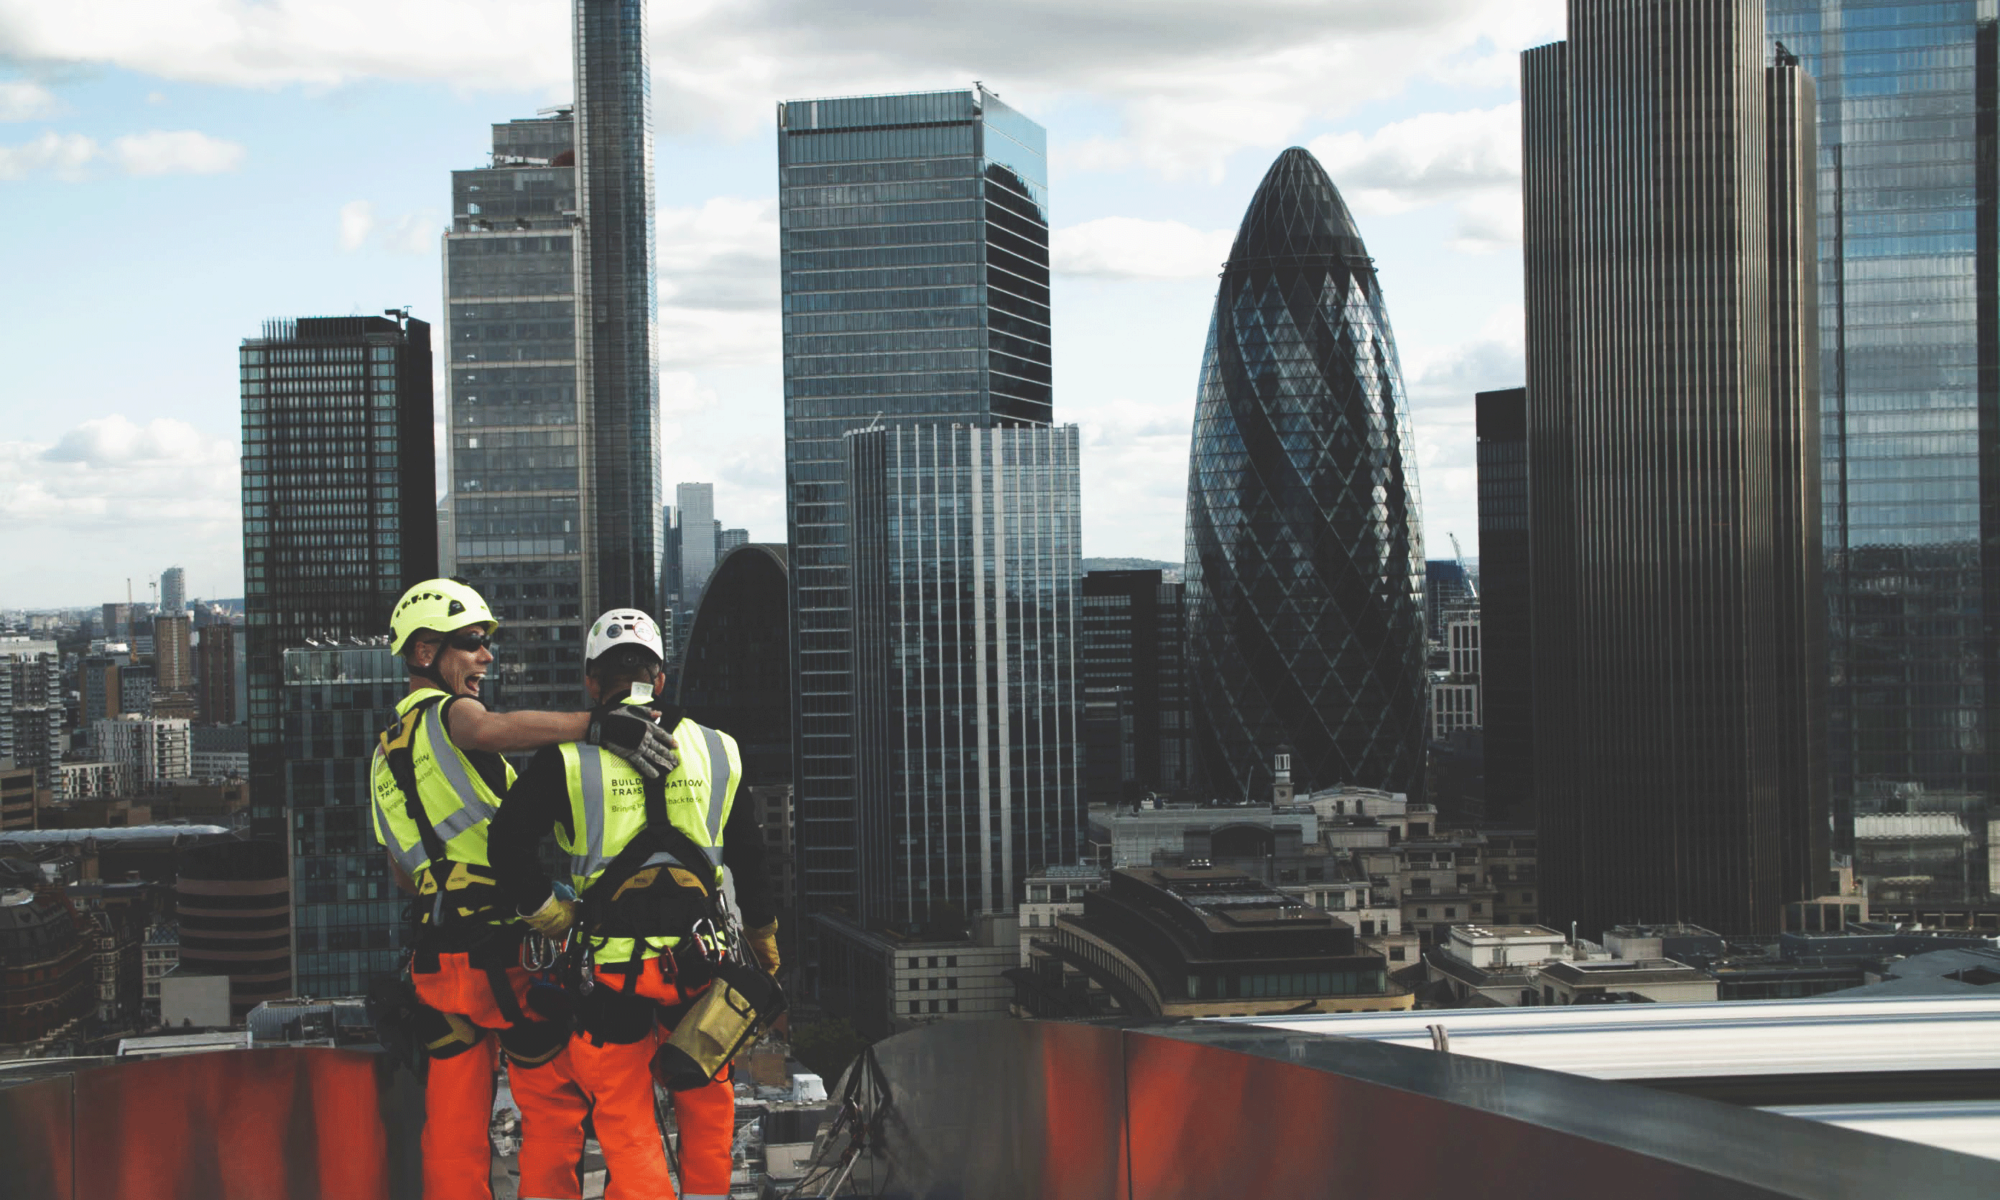 Building Transformation employees laughing together with London Skyline in the background